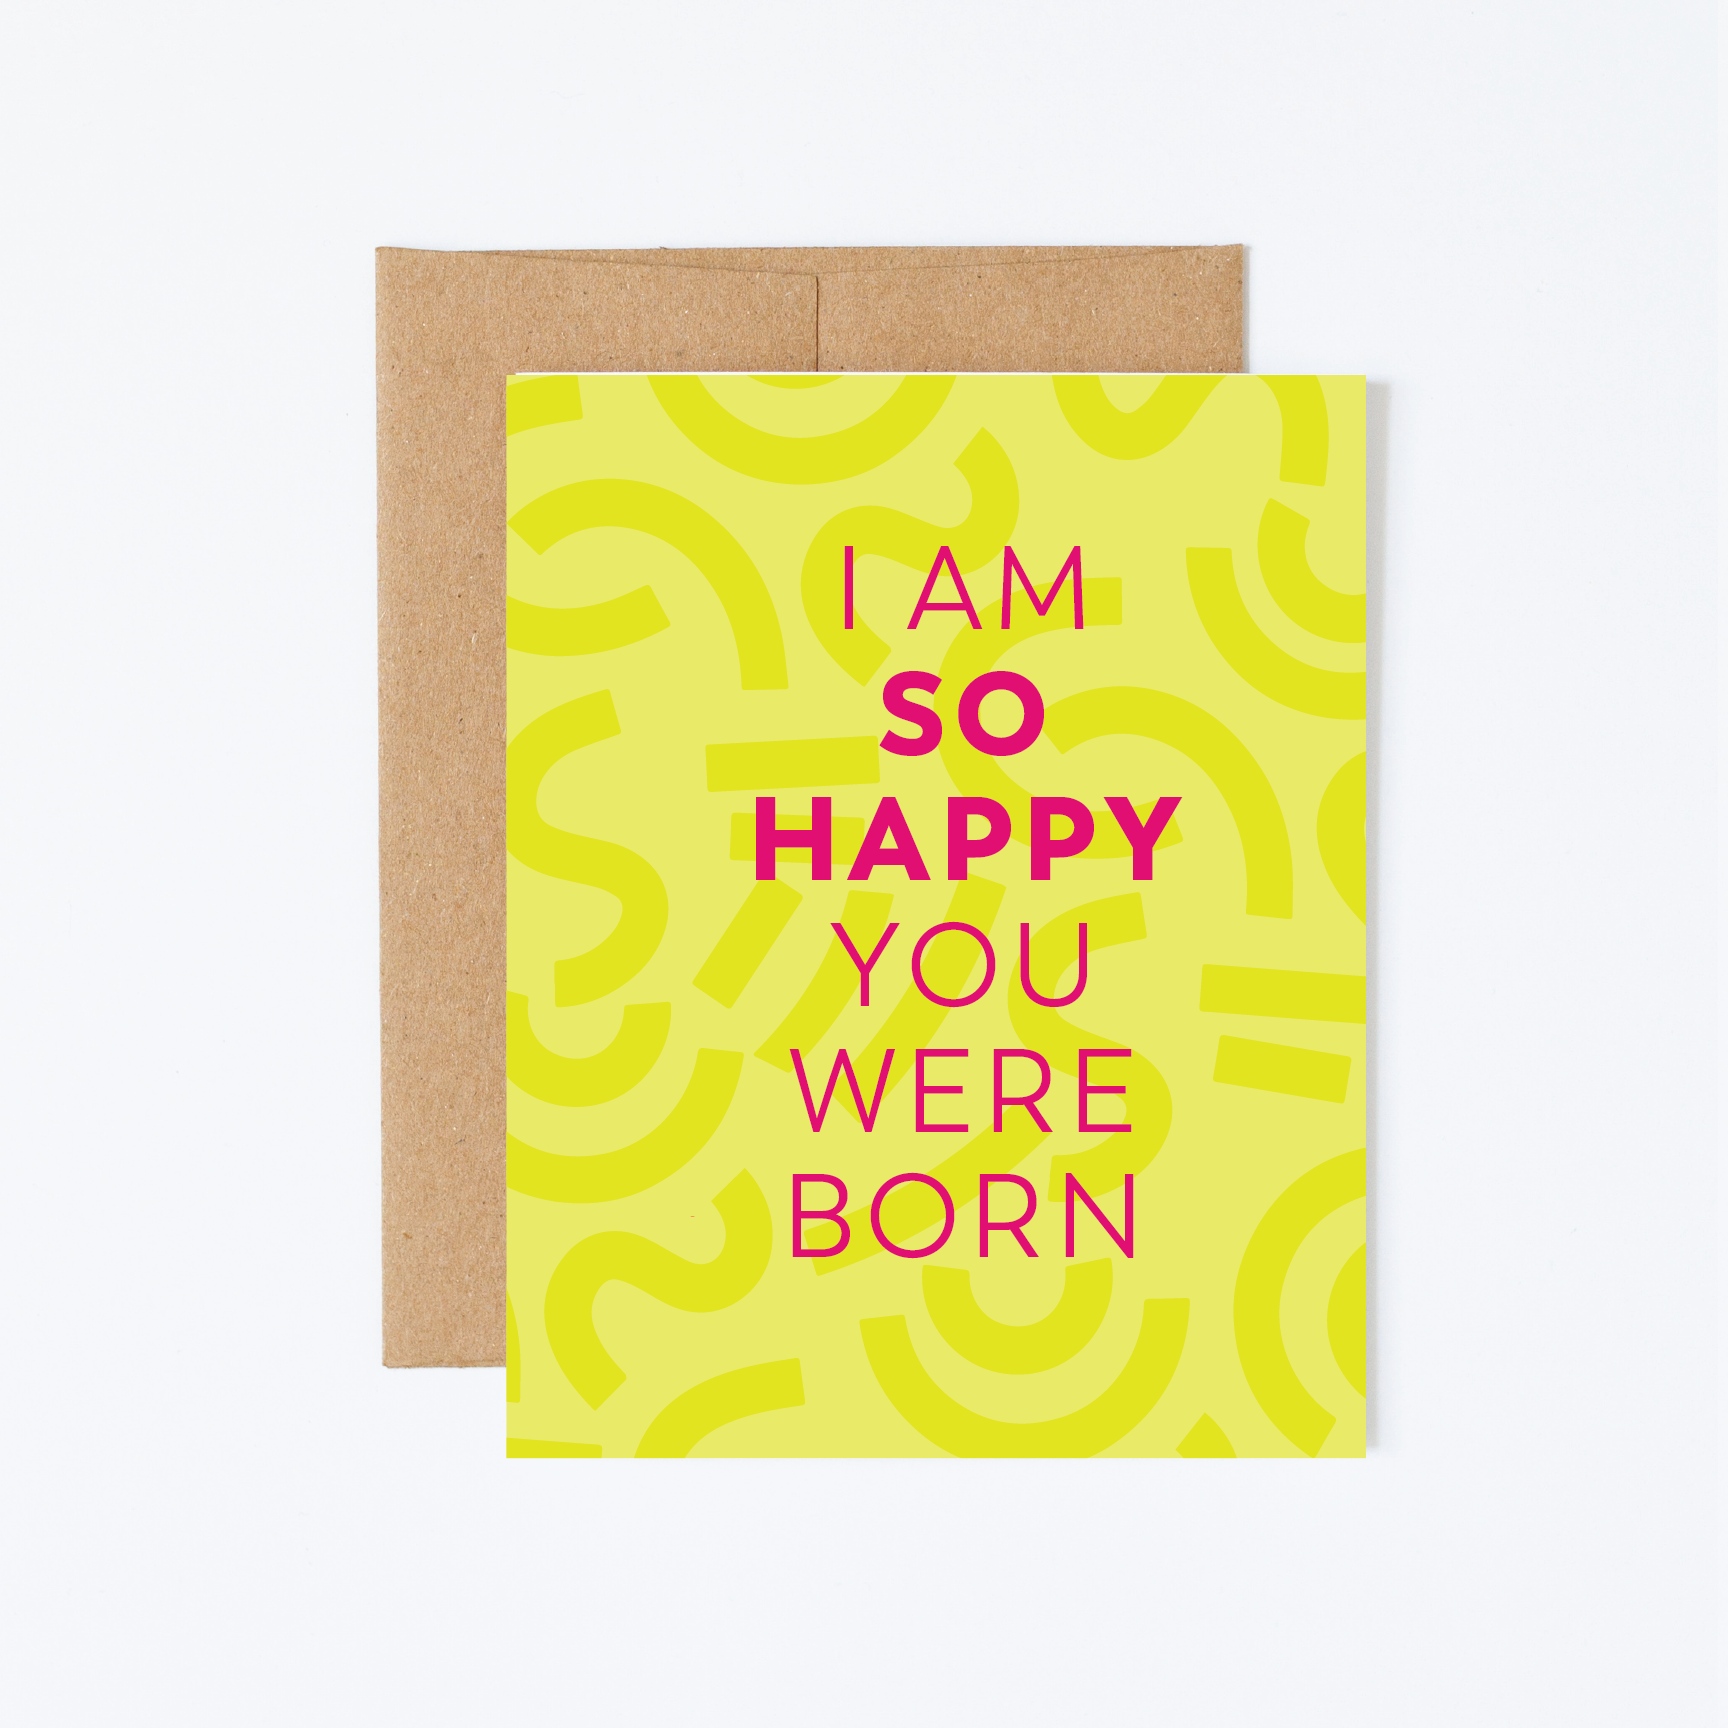 So Happy You Were Born Greeting Card